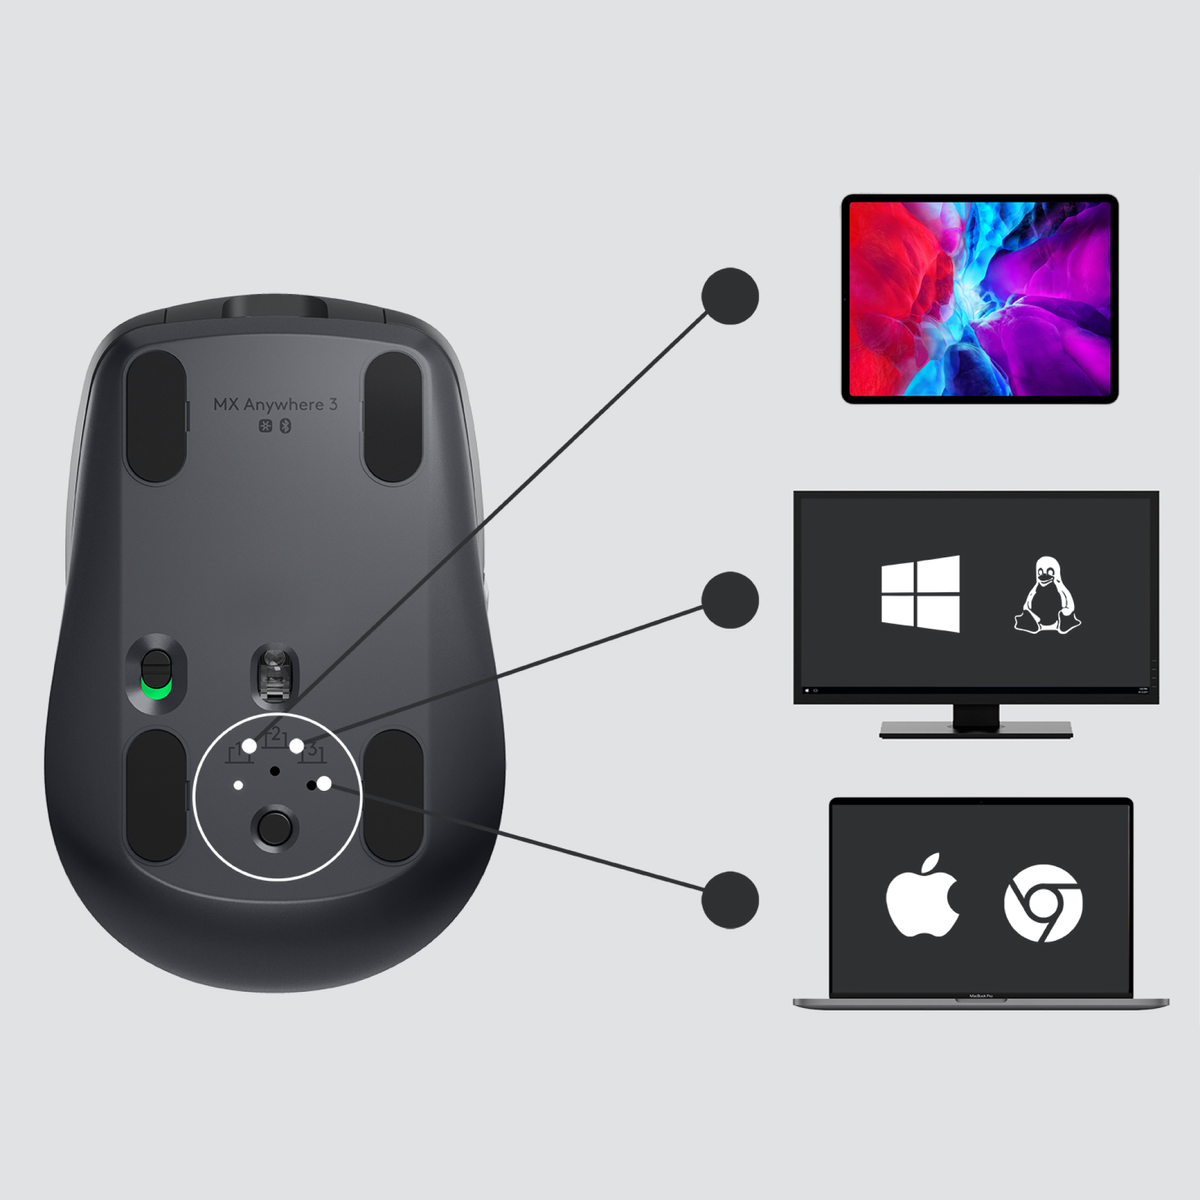 LOGITECH Anywhere Maus, for 3 Business Weiß